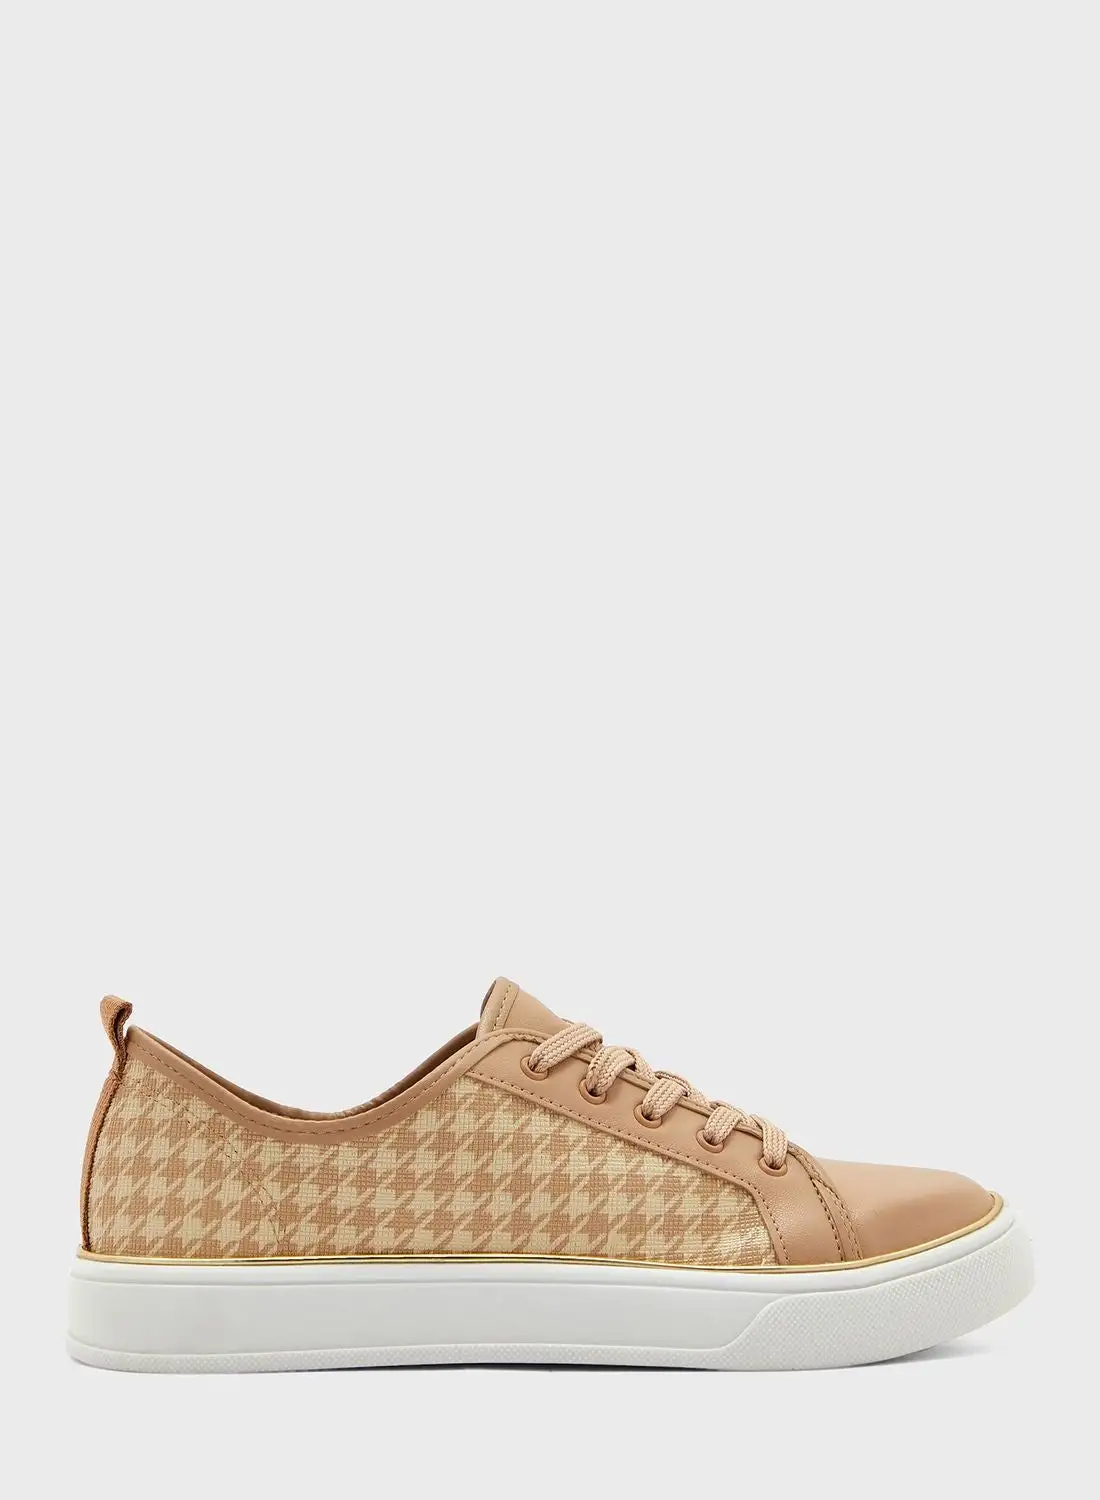 Beira Rio Adaline Lace Up Low Top Sneakers